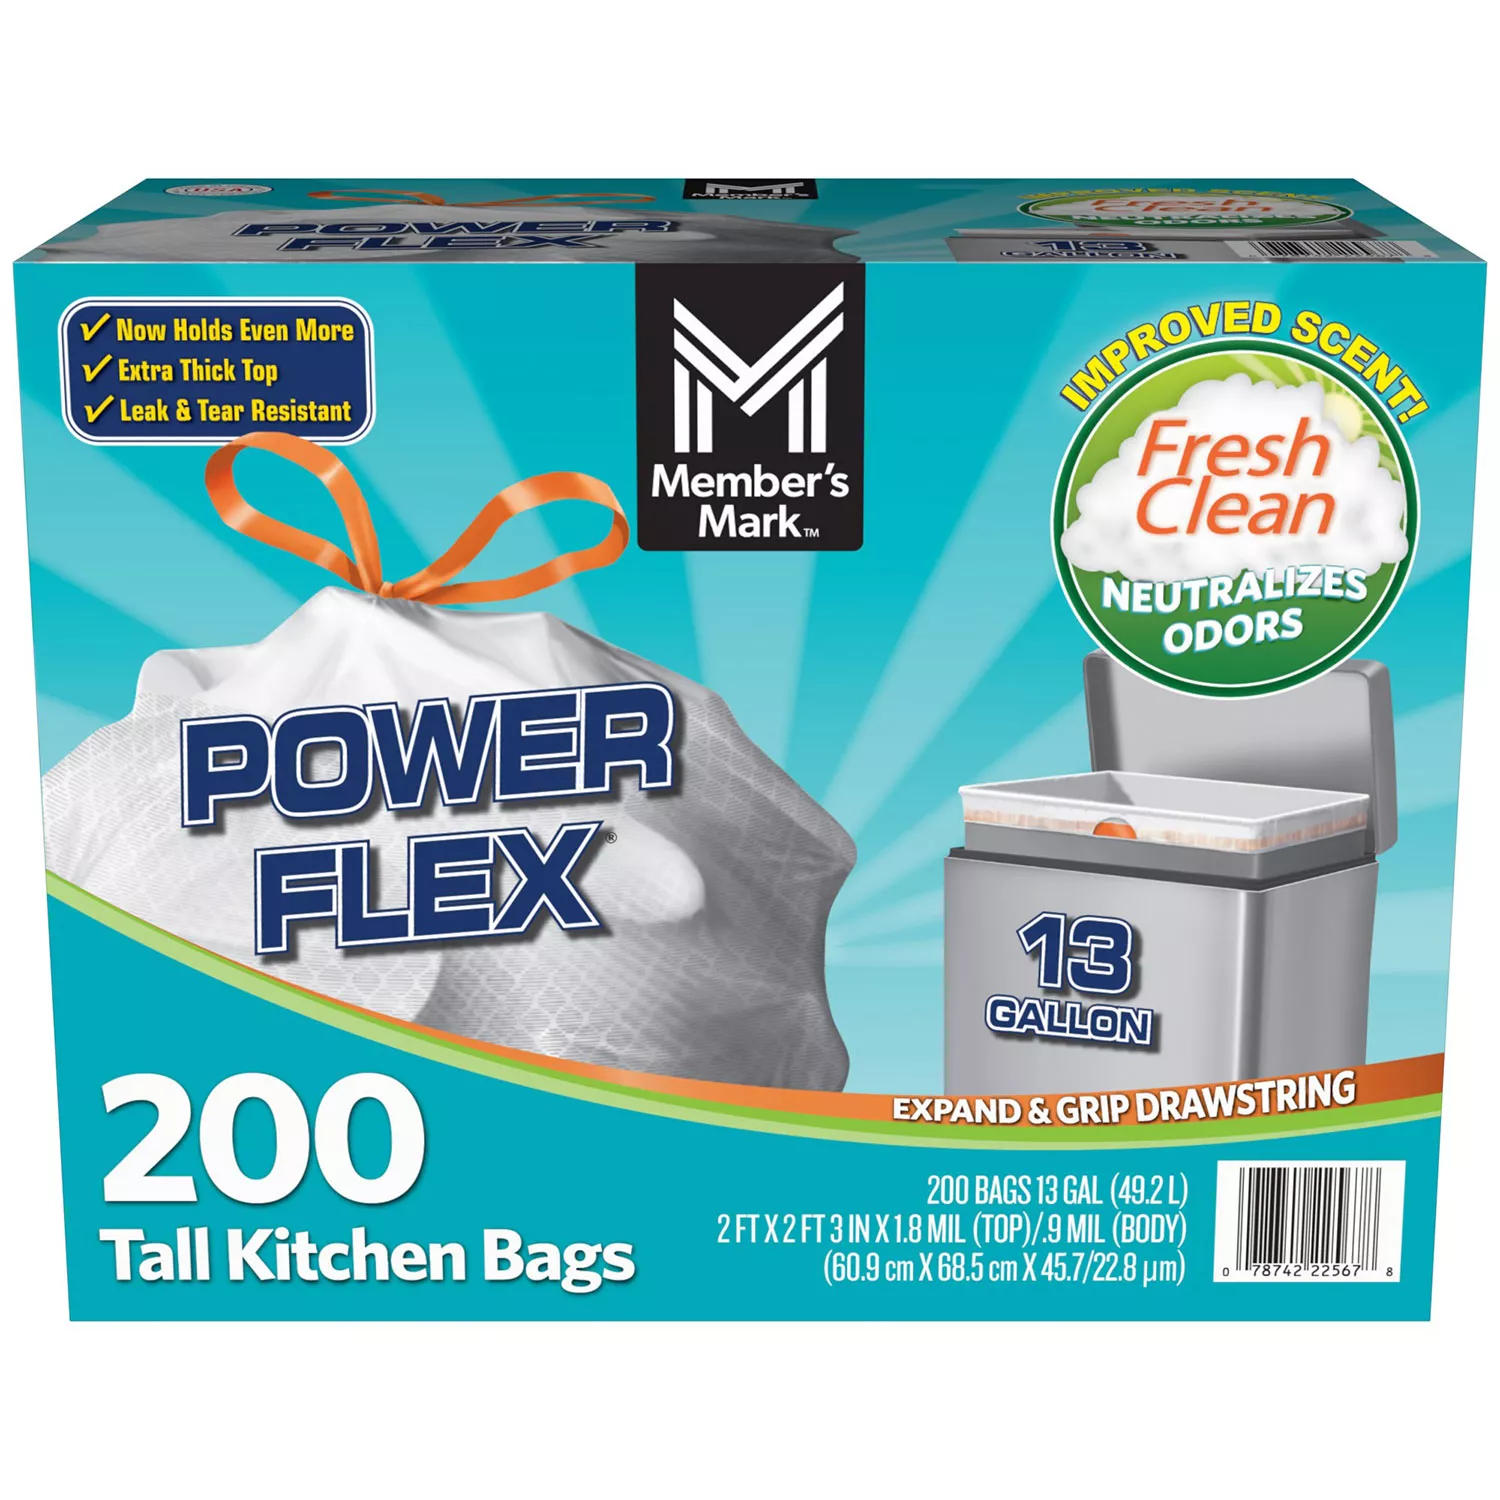 Member's Mark Tall Kitchen Drawstring Bags (13 Gallon, 200 Count) - Fresh Scent